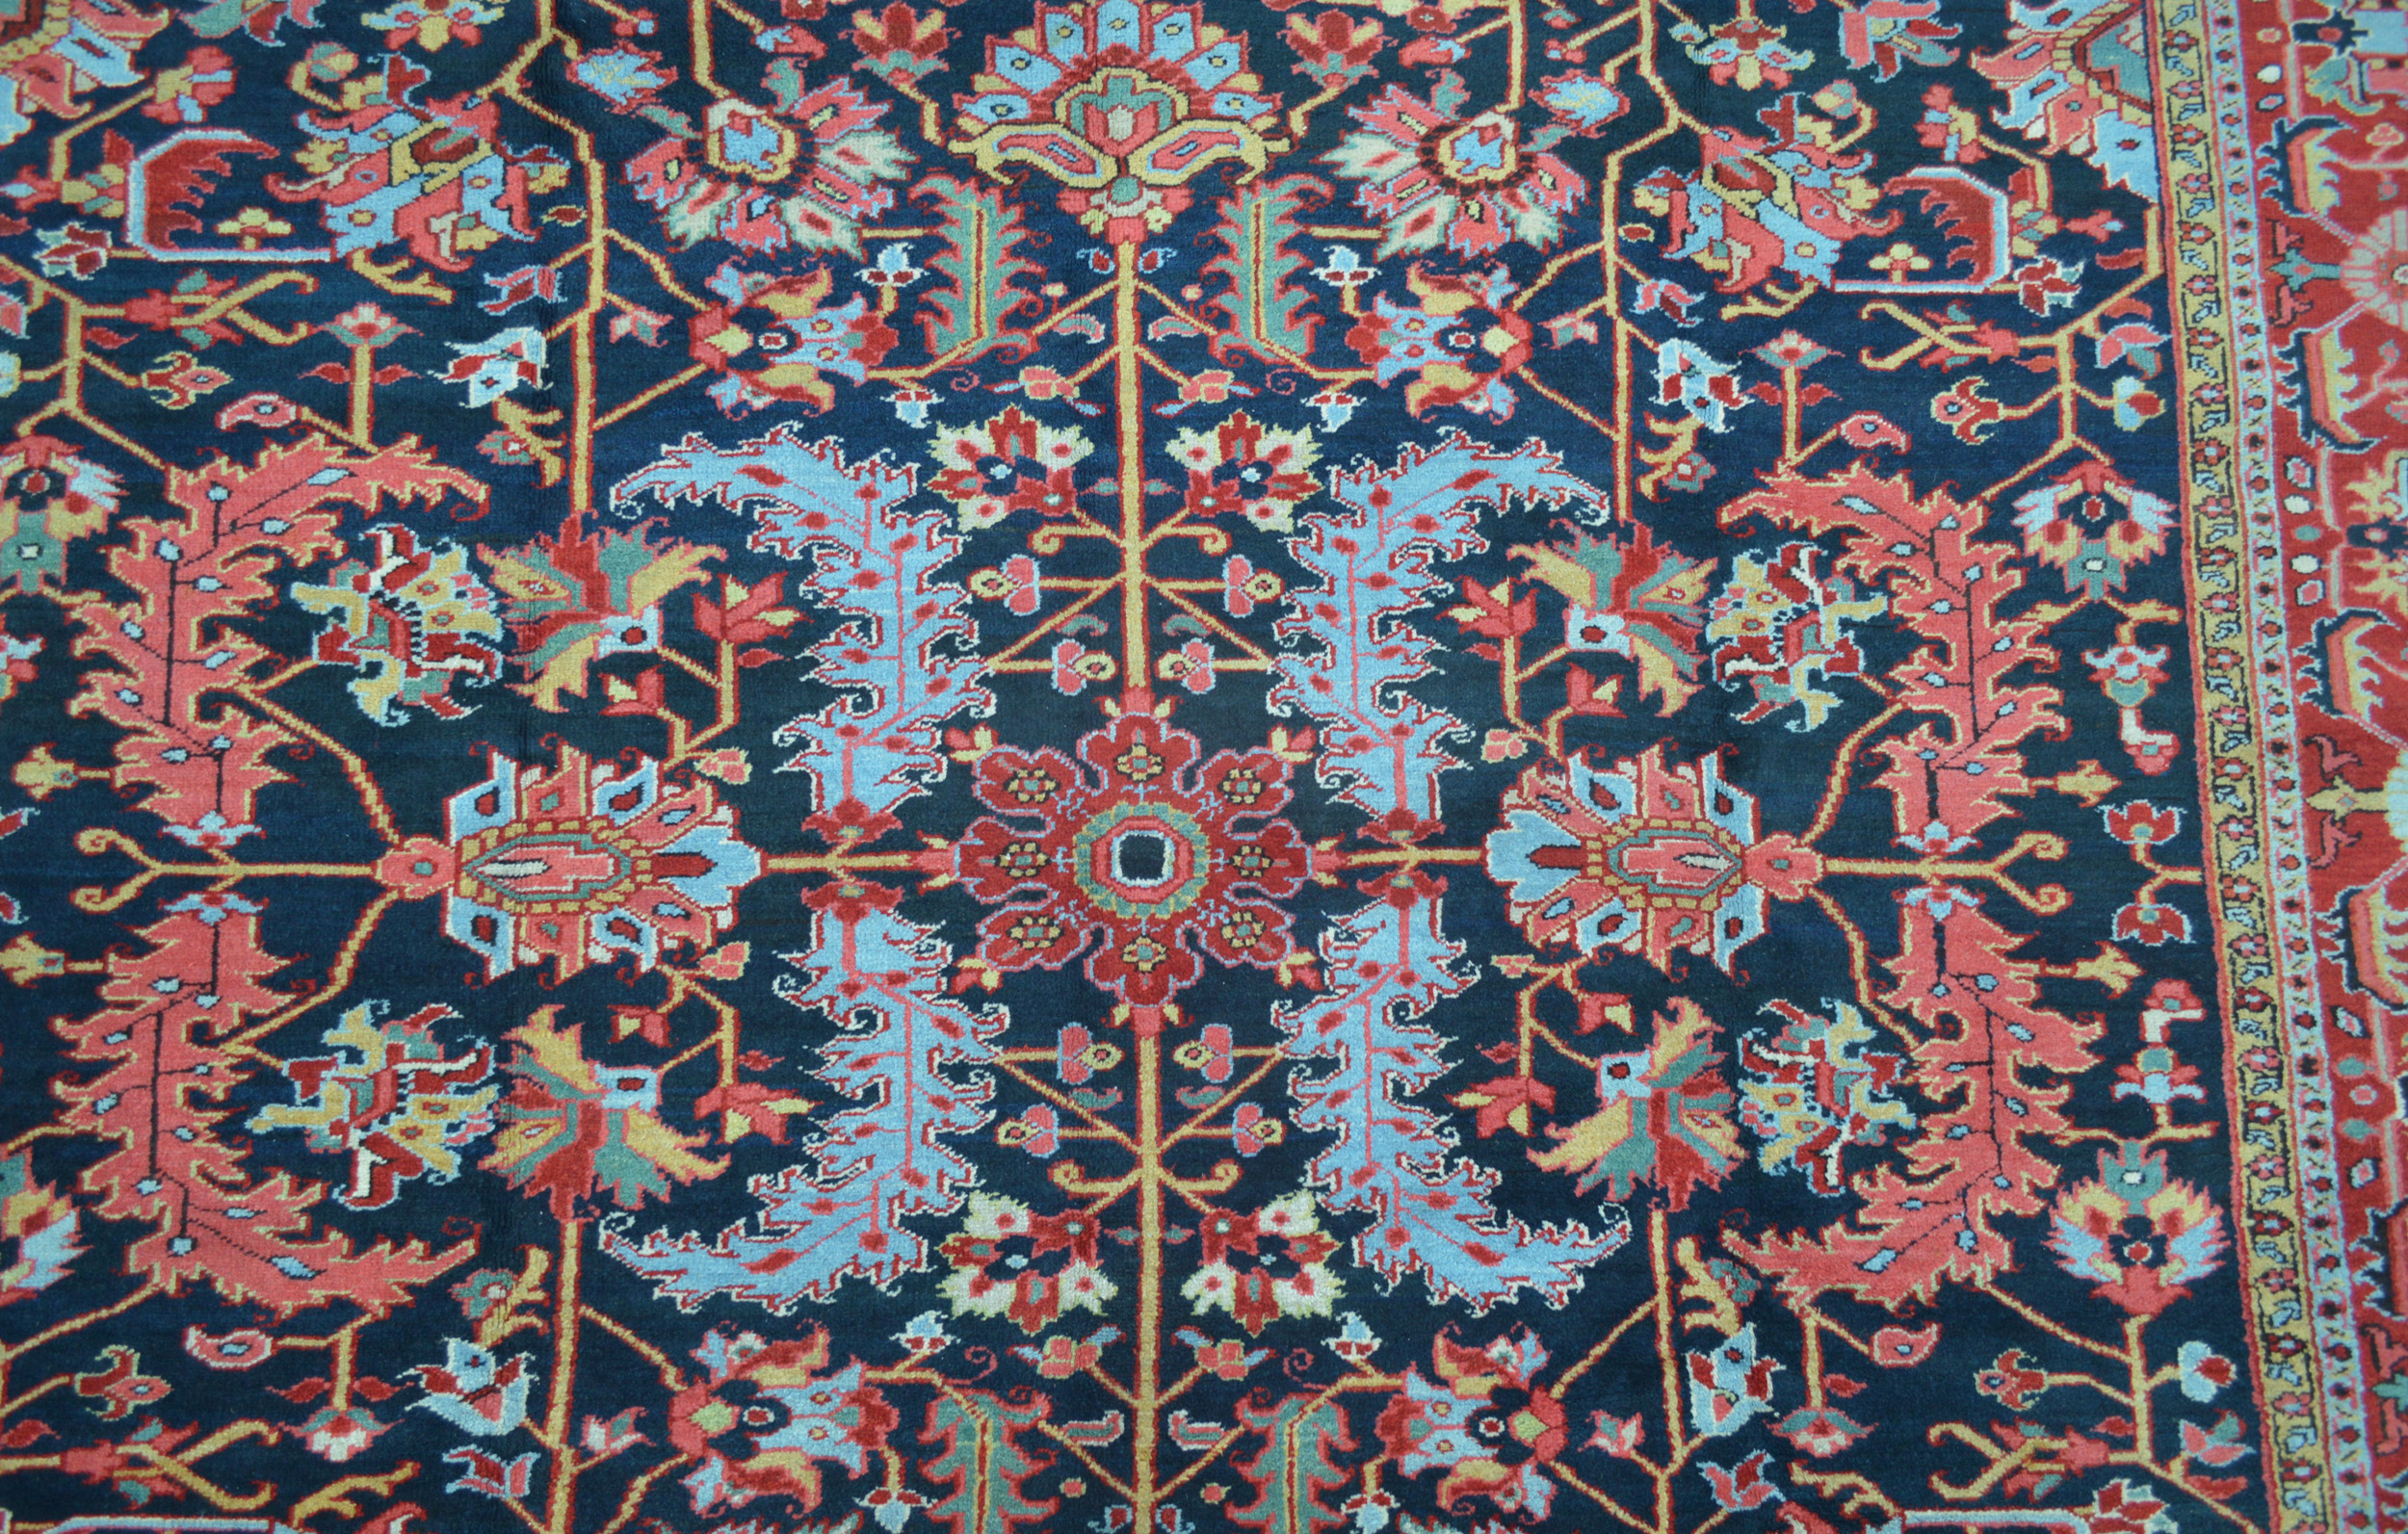 Field detail from an antique Persian Heriz carpet with large leaves on a navy blue field, Douglas Stock Gallery, antique Oriental rugs